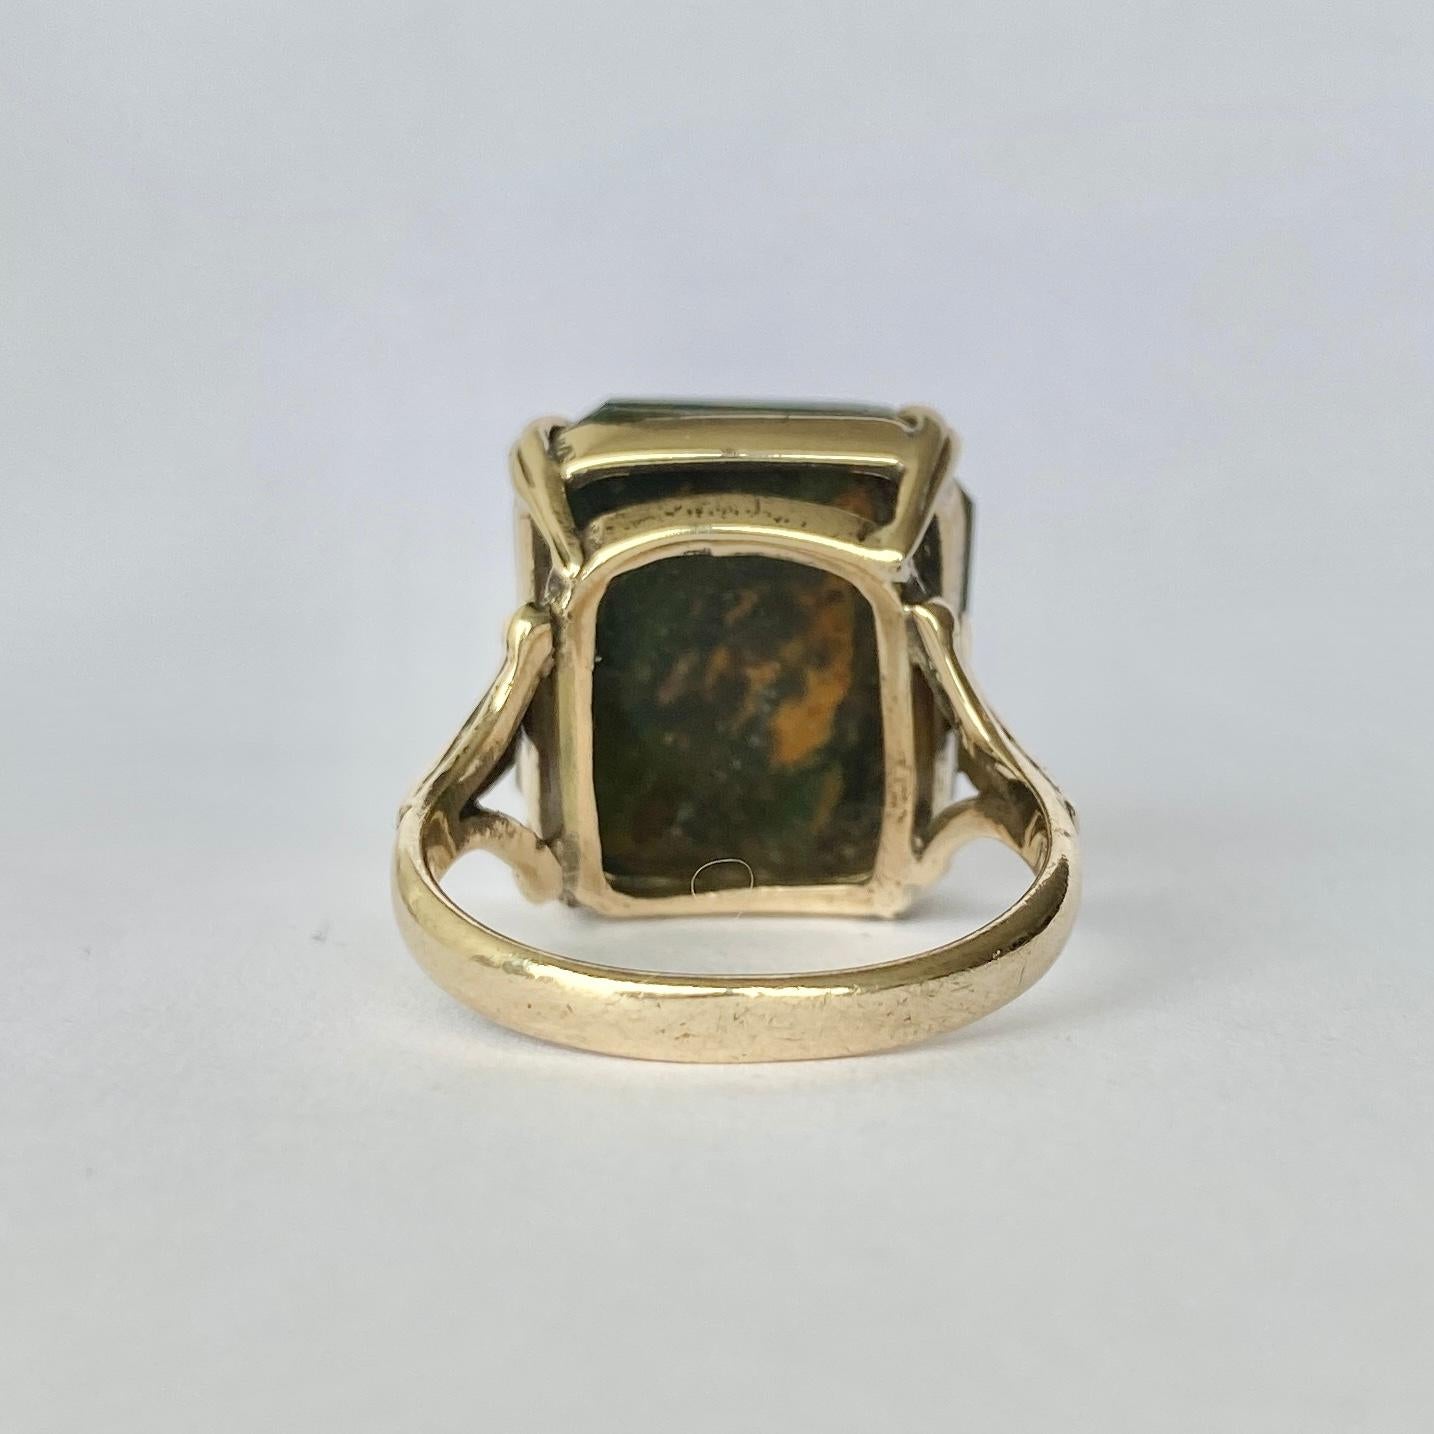 This wonderful agate stone has marbling of deep green and amber colour running through. There are double claws holding the stone and ornate shoulders leading to an open gallery.

Ring Size: P 1/2 or 8
Stone Dimensions: 18.5x16mm 

Weight: 6.3g